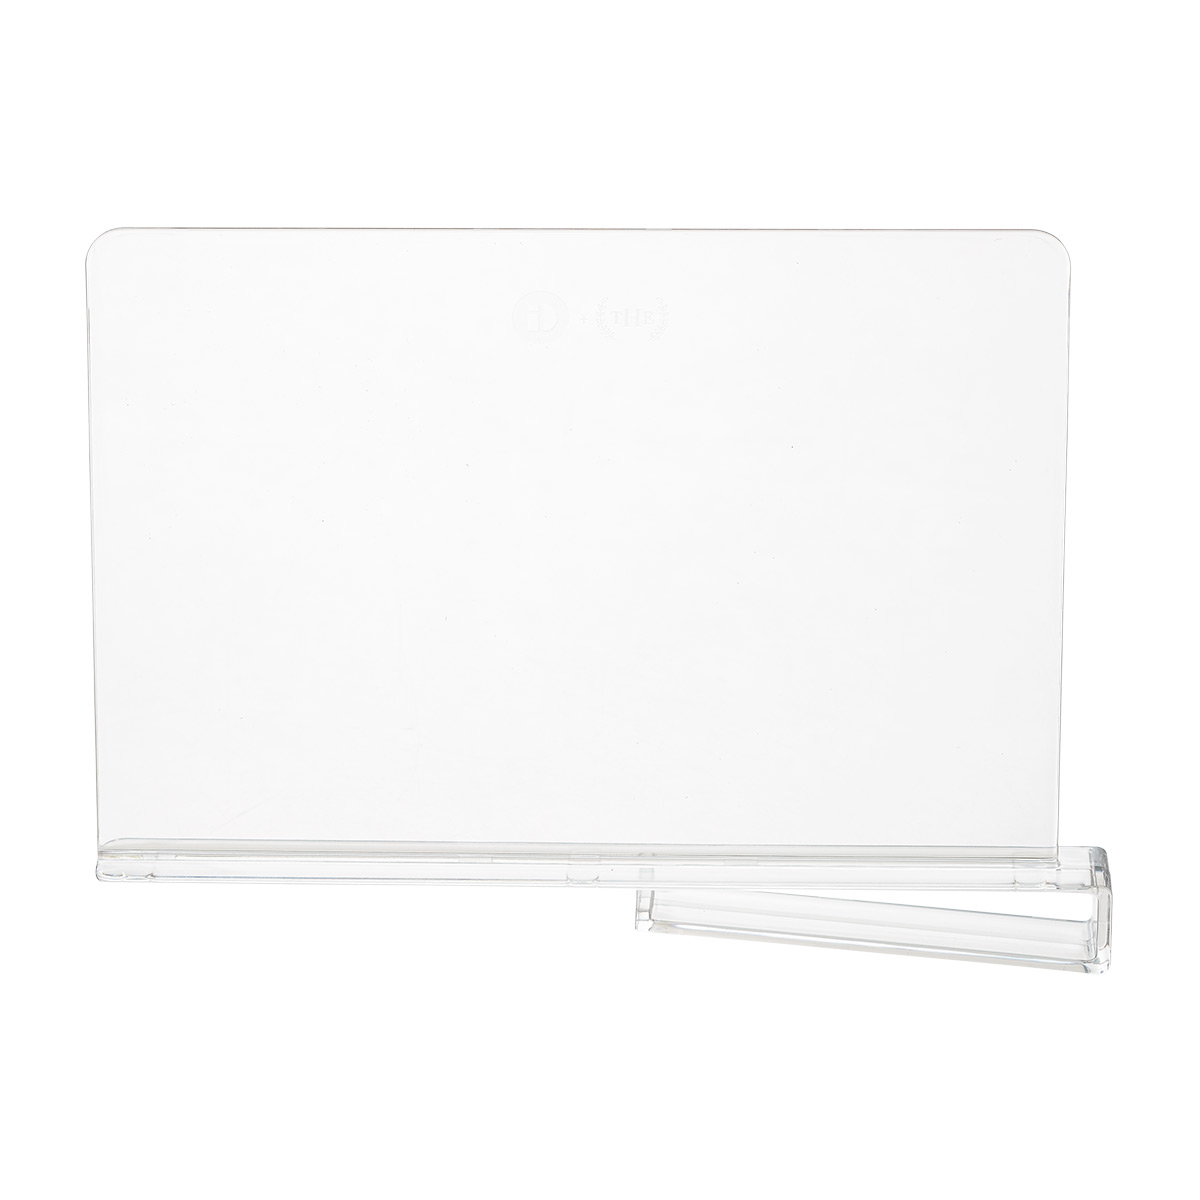 THE HOME EDIT Shelf Divider Clear